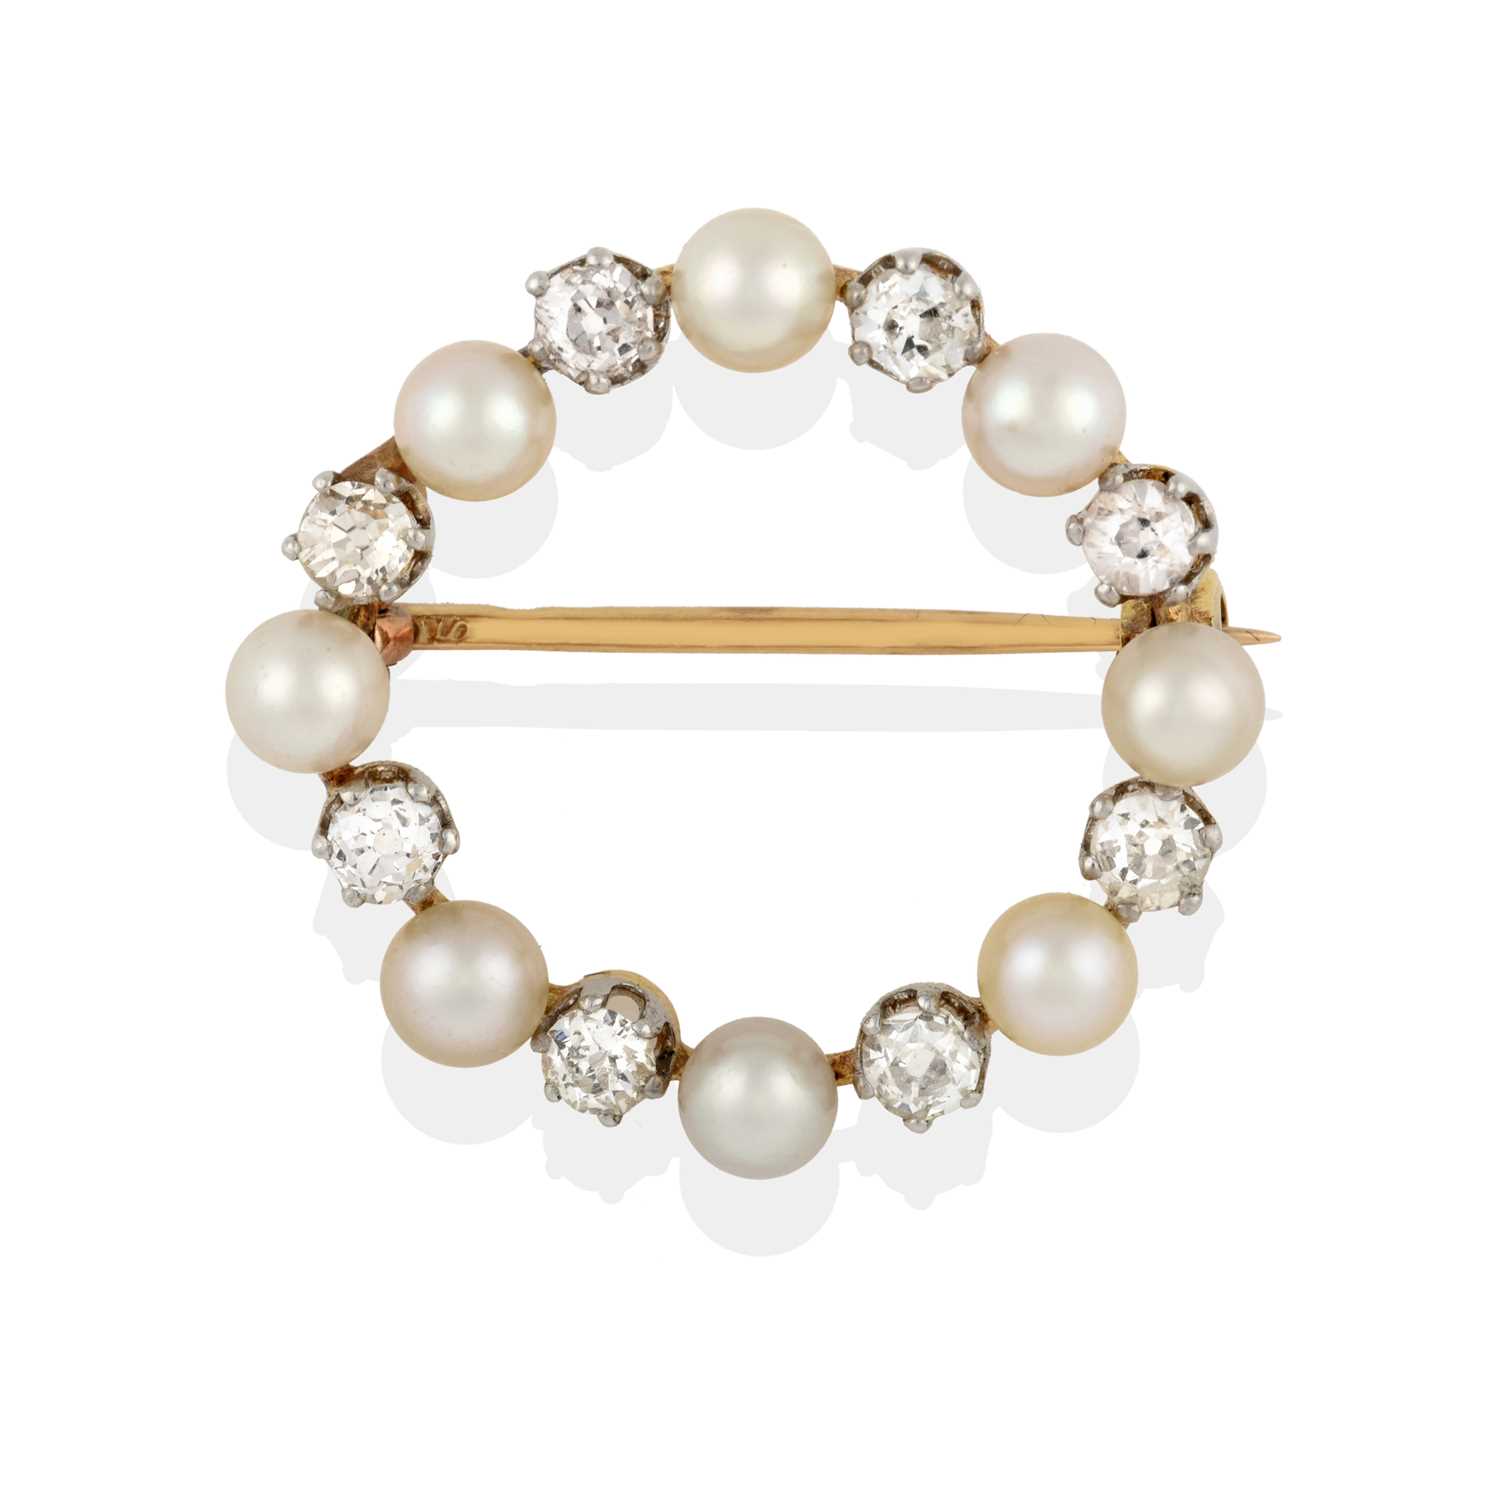 Lot 2398 - A Cultured Pearl and Diamond Brooch